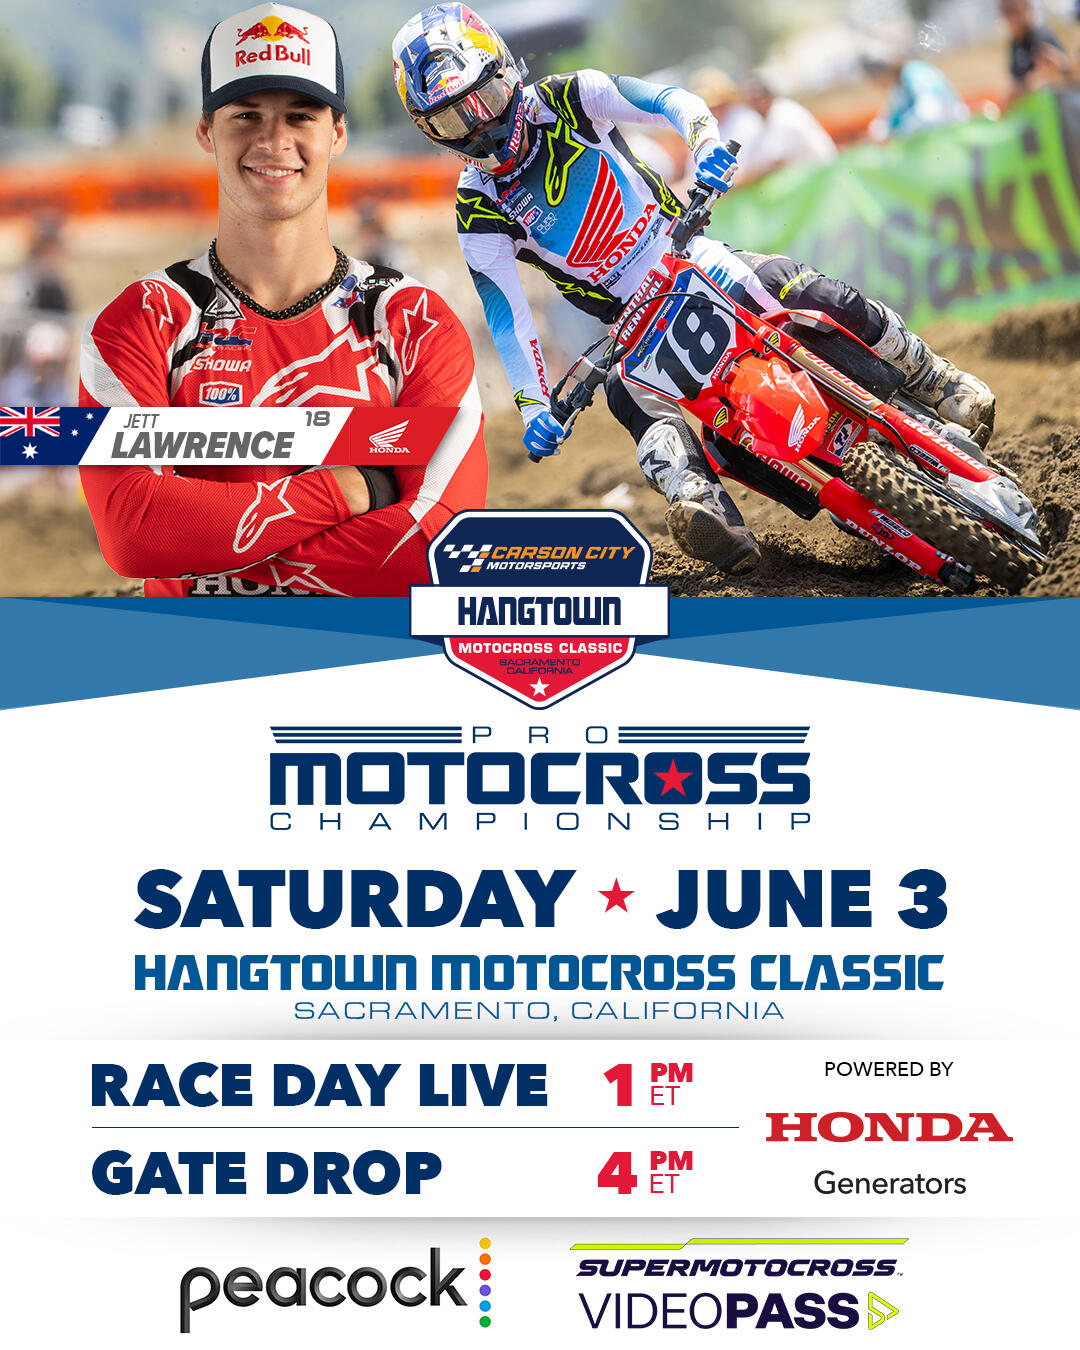 How To Watch Carson City Motorsports Hangtown Motocross Classic